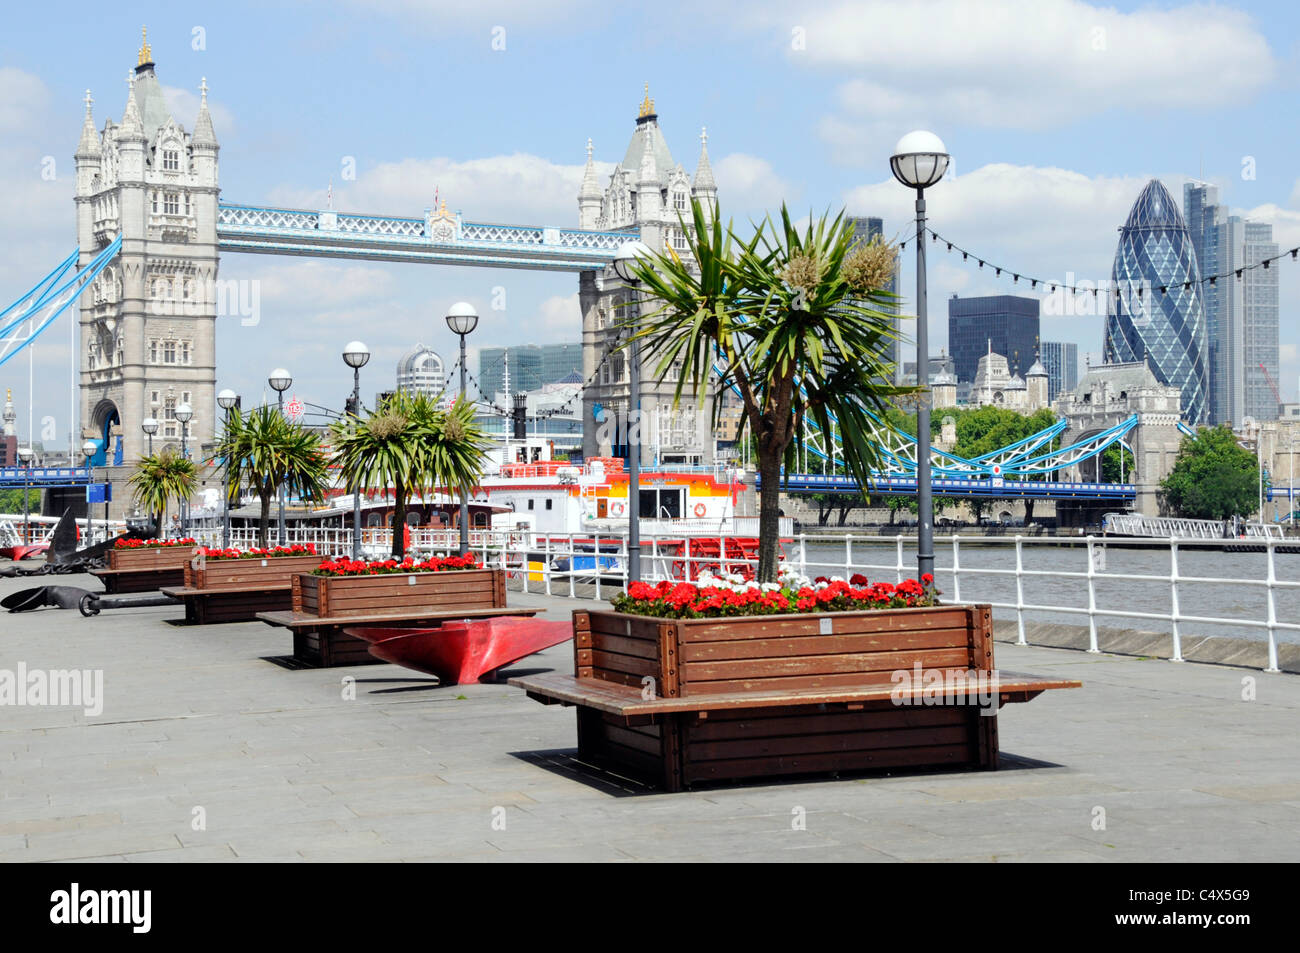 Thames Path Butlers Wharf on River Thames views of Tower Bridge & London skyline Gherkin skyscraper red flower & cordyline trees in planters London UK Stock Photo